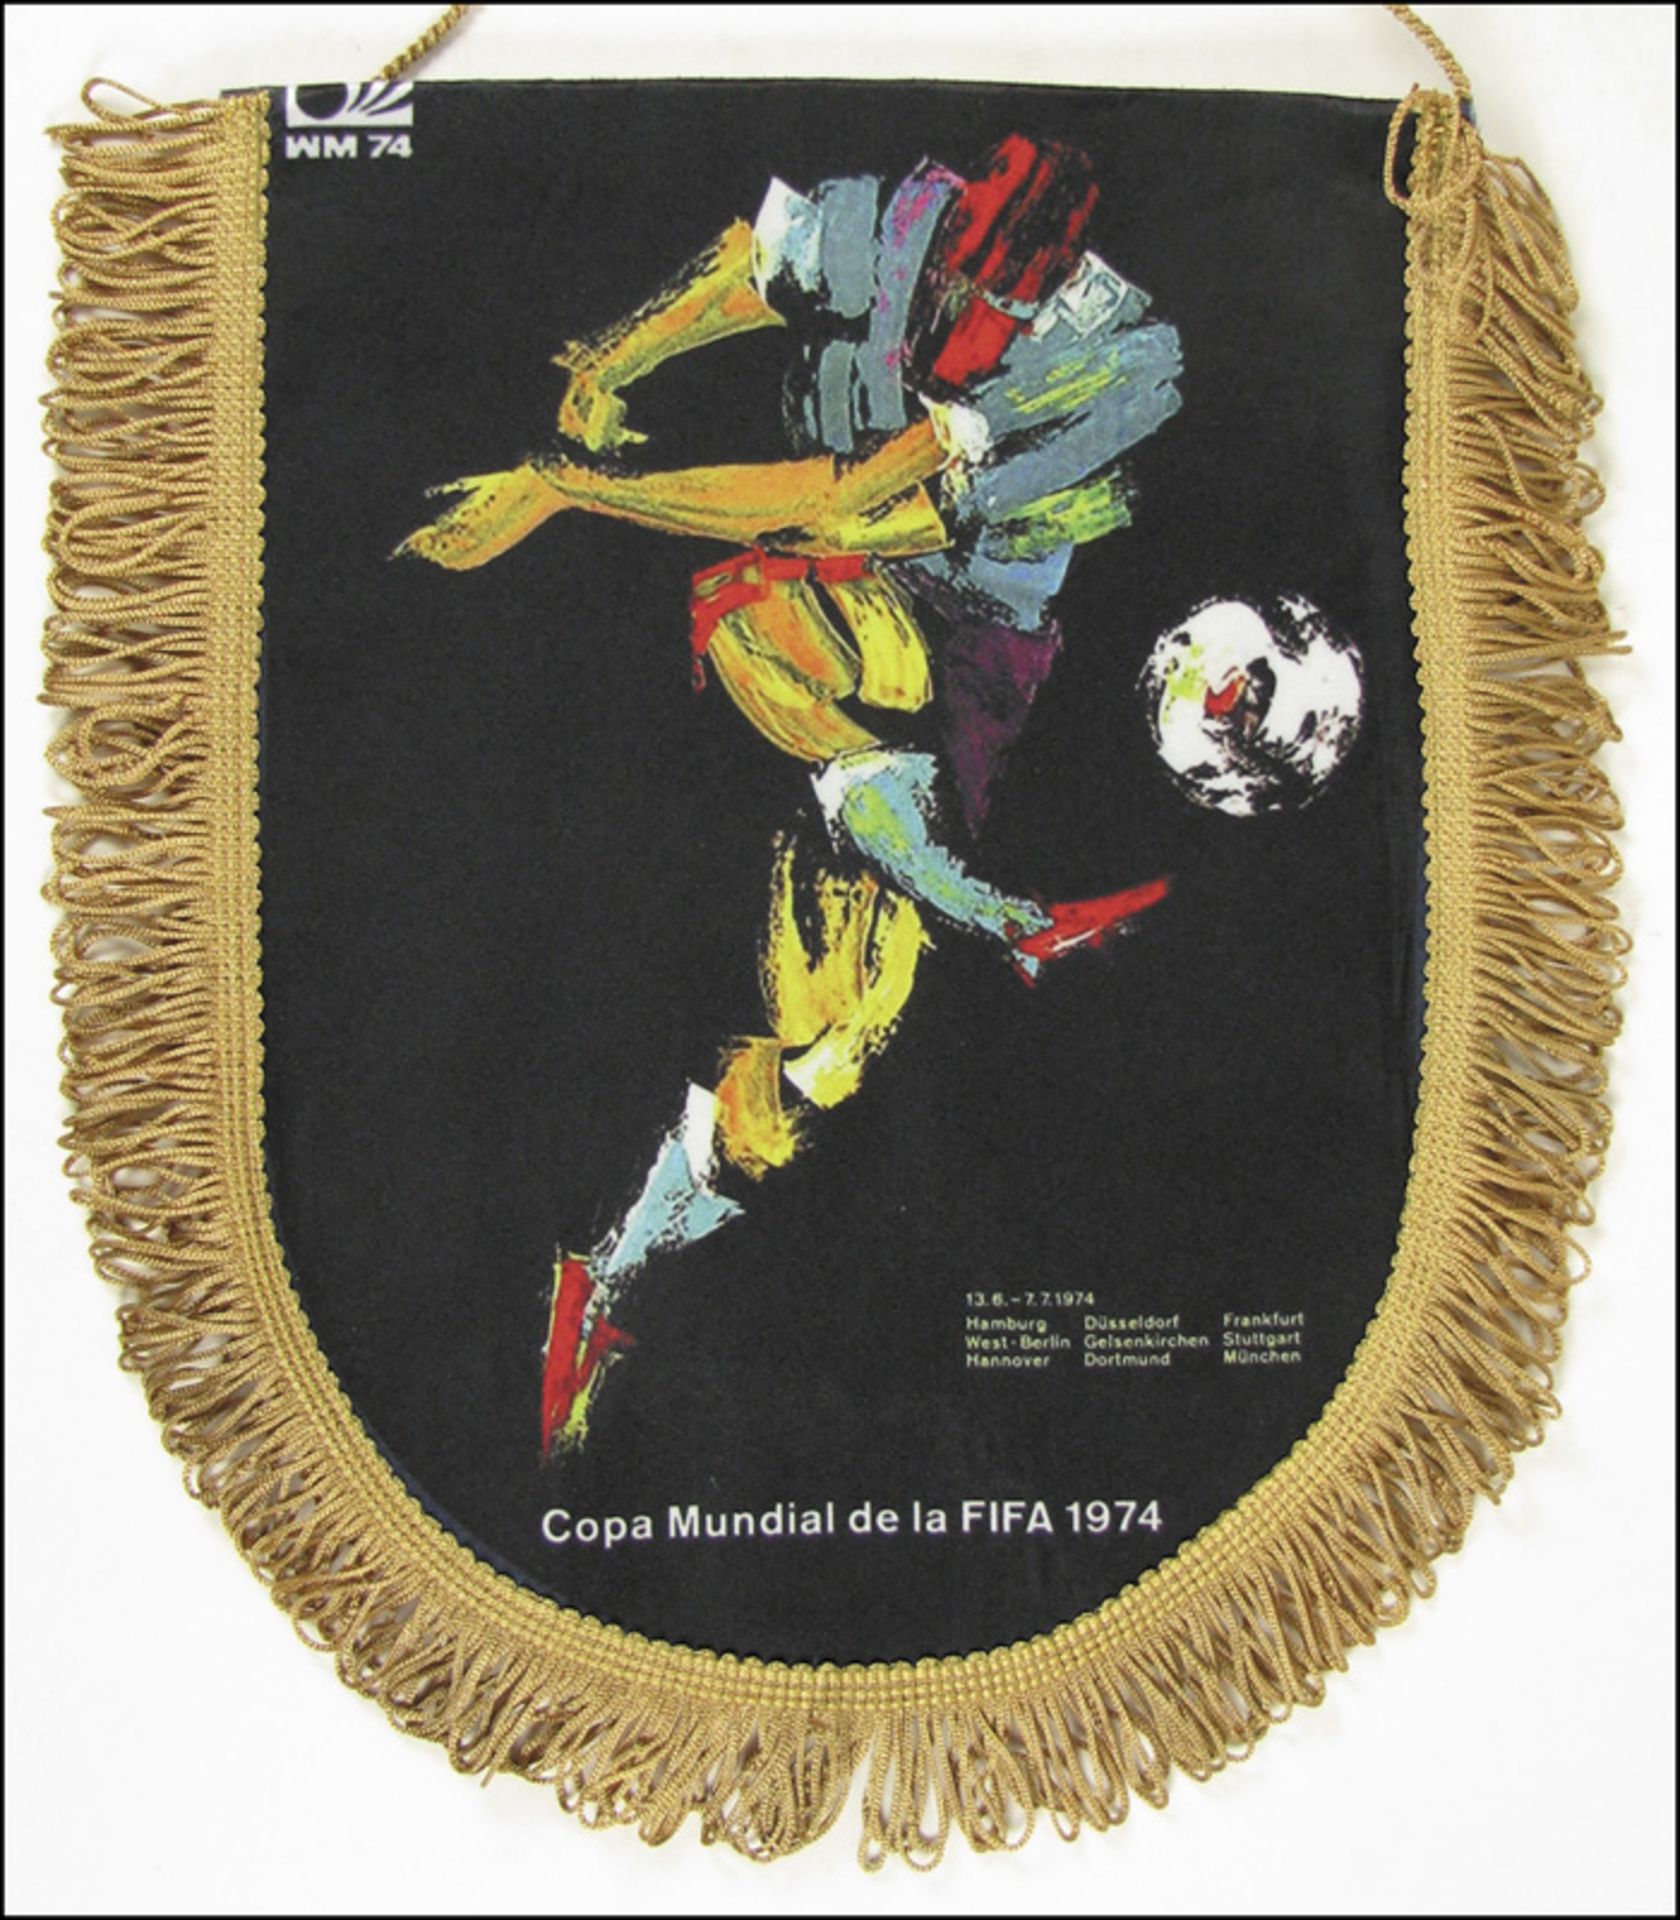 World Cup 1974. Commemorative Pennant - Color printed souvenir pennants from the 1974 FIFA World Cup